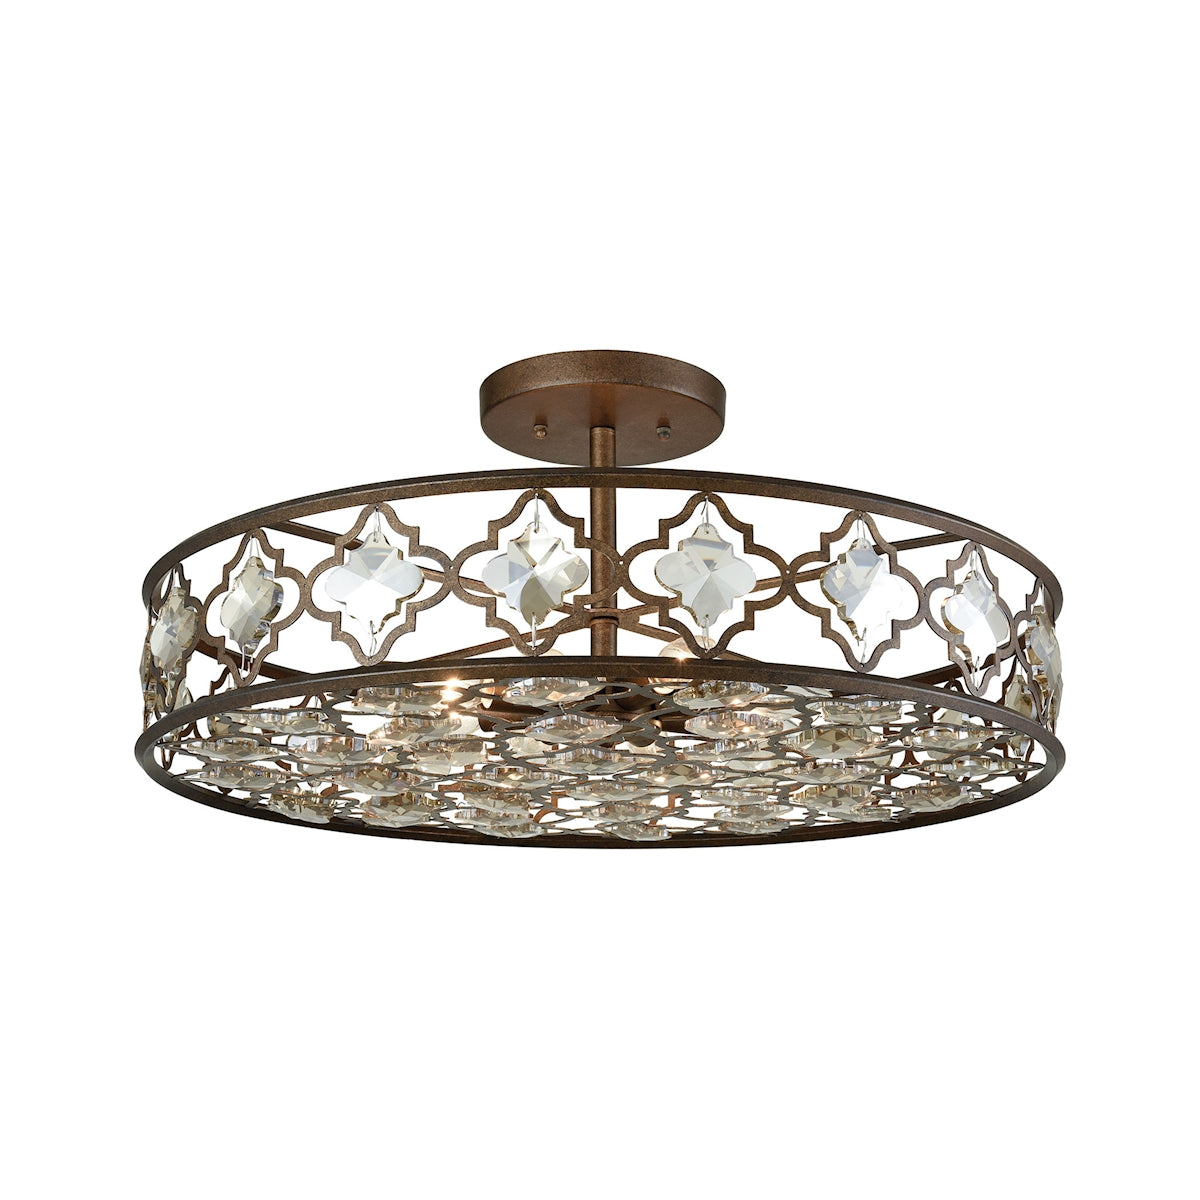 ELK Lighting 31093/8 Armand 8-Light Semi Flush in Weathered Bronze with Champagne-plated Crystals